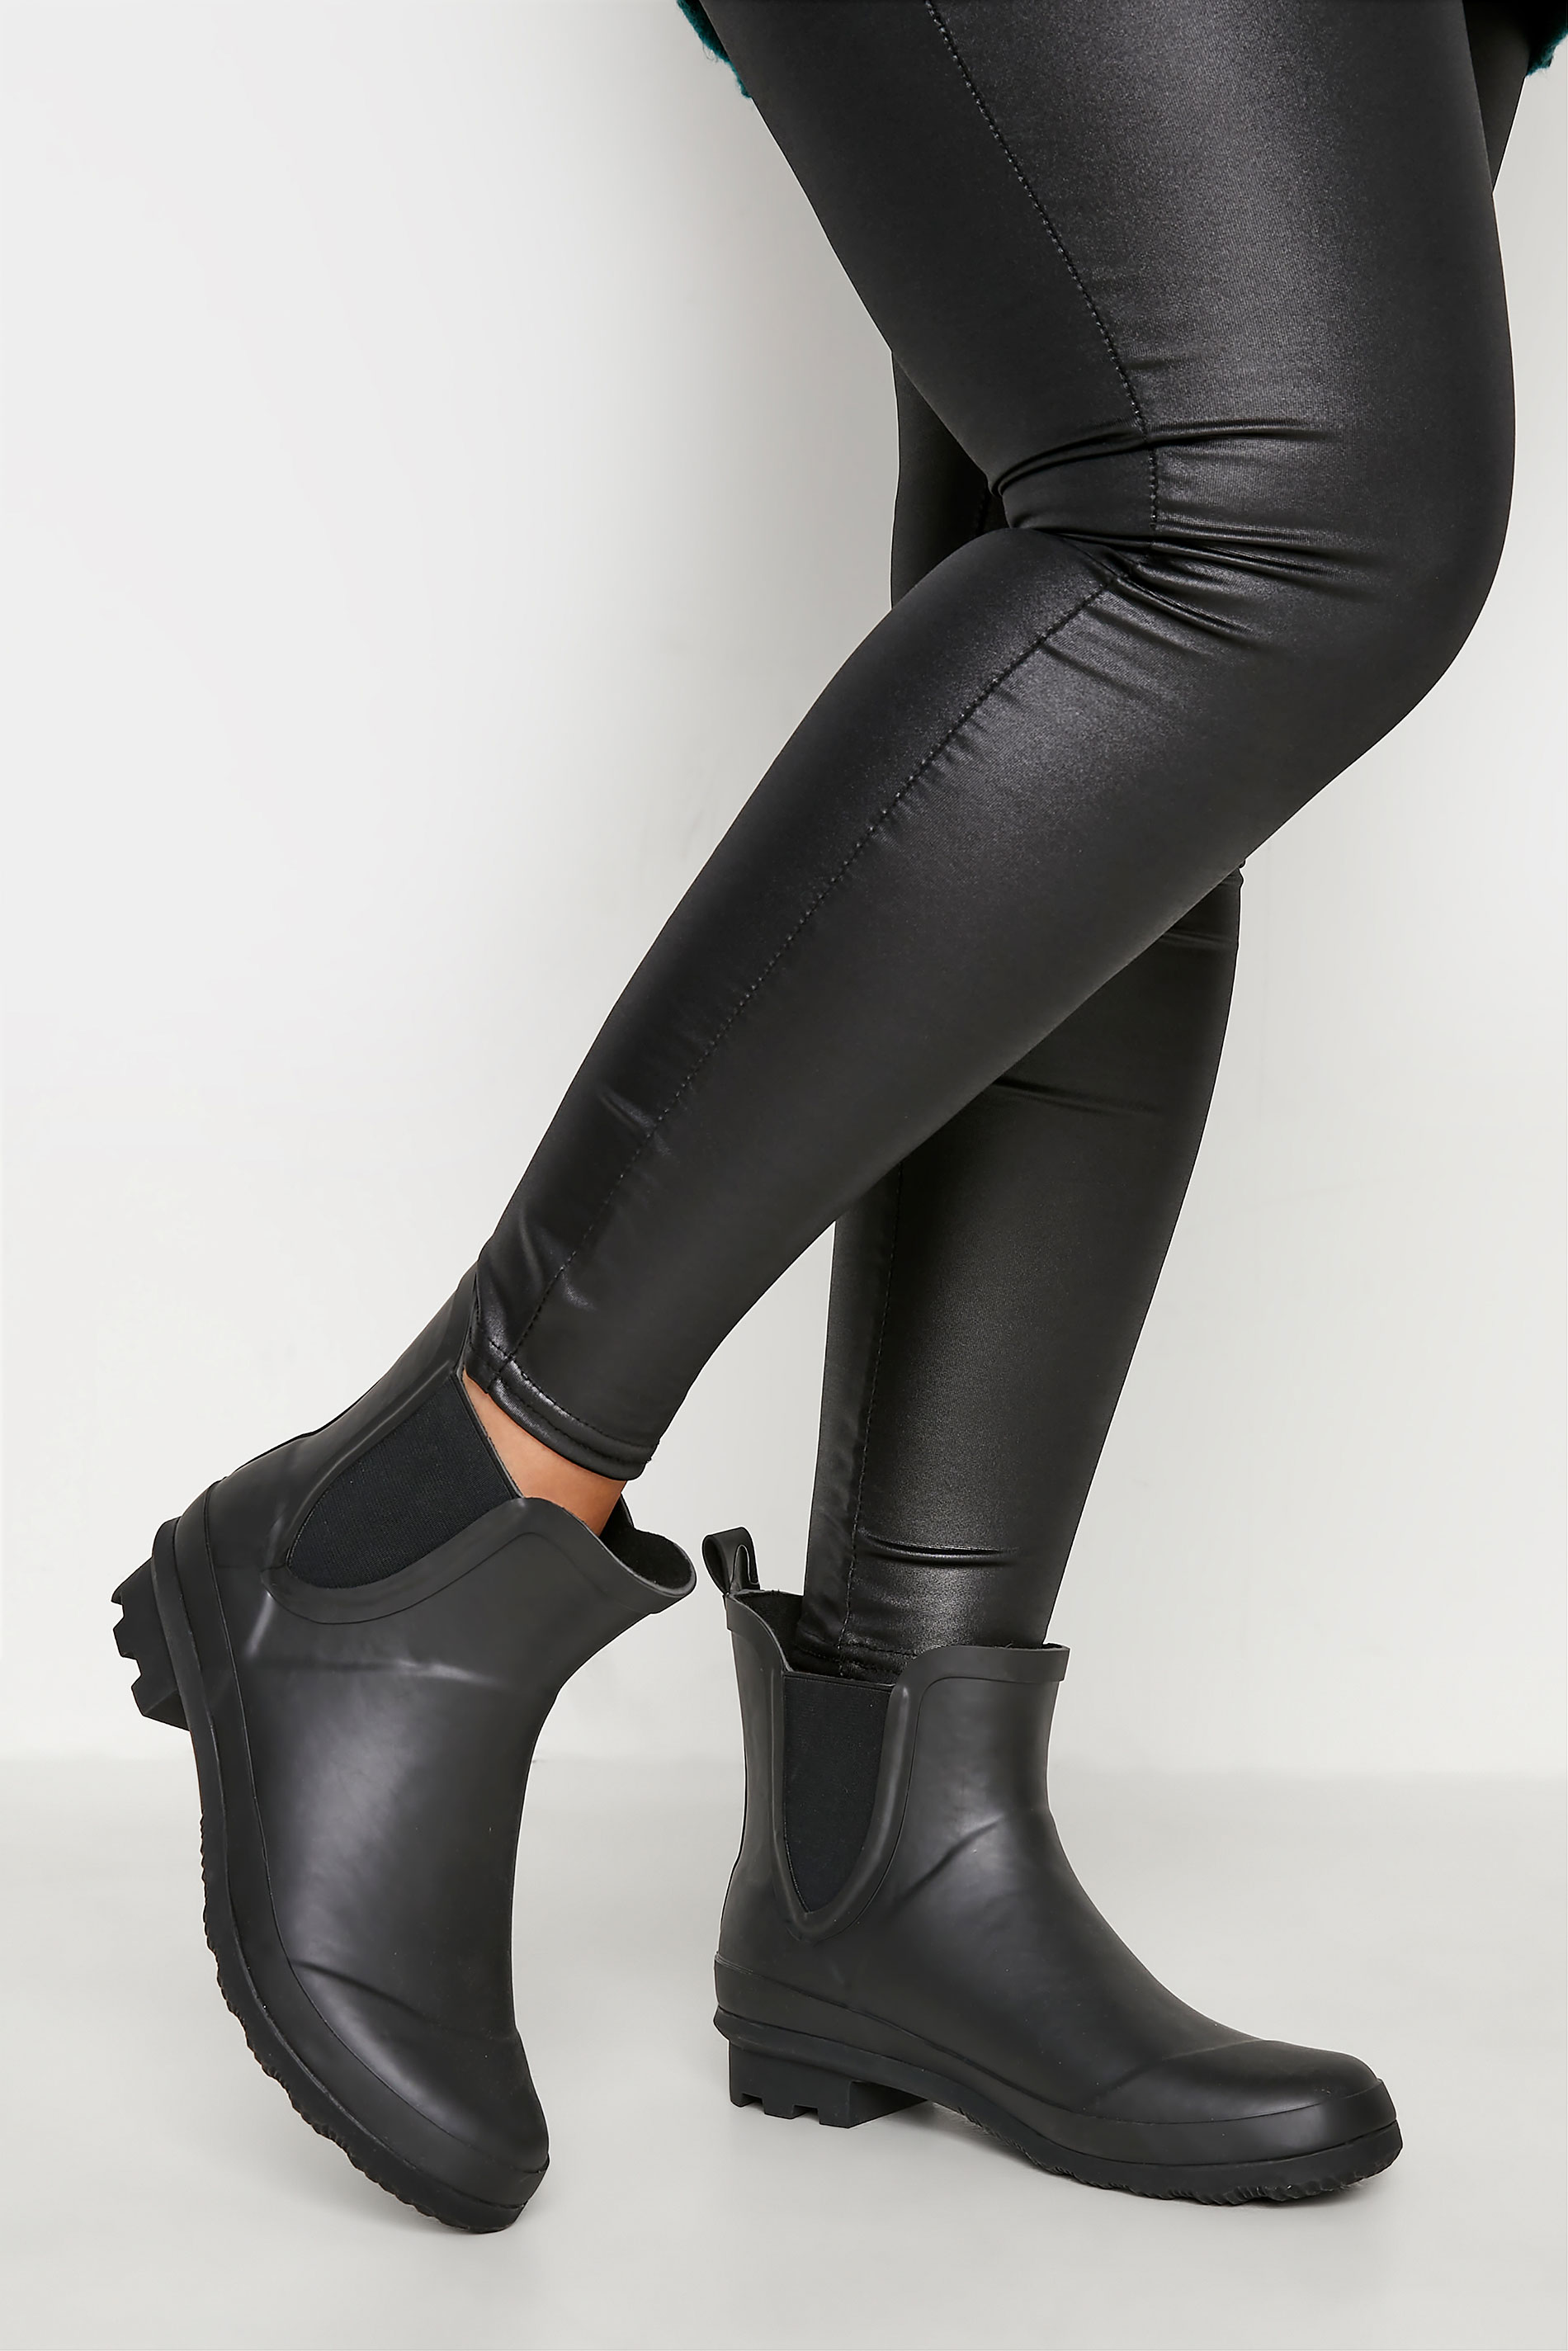 Black Chelsea Wellies In Wide E Fit | Yours Clothing 1